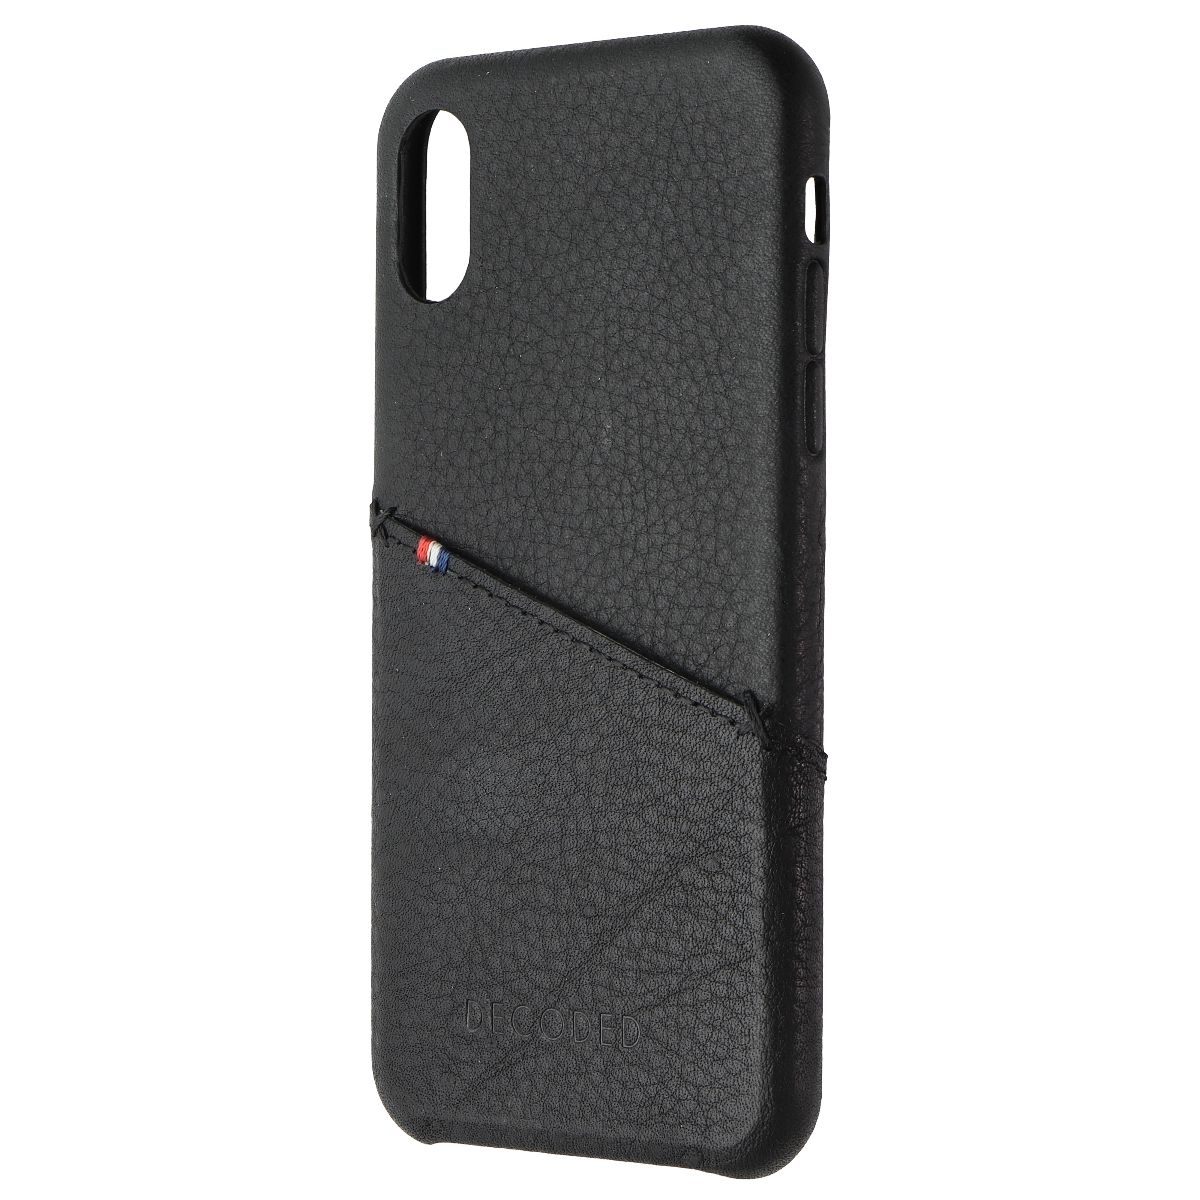 DECODED Full Grain Leather Card Case For Apple IPhone X - Black (Refurbished)